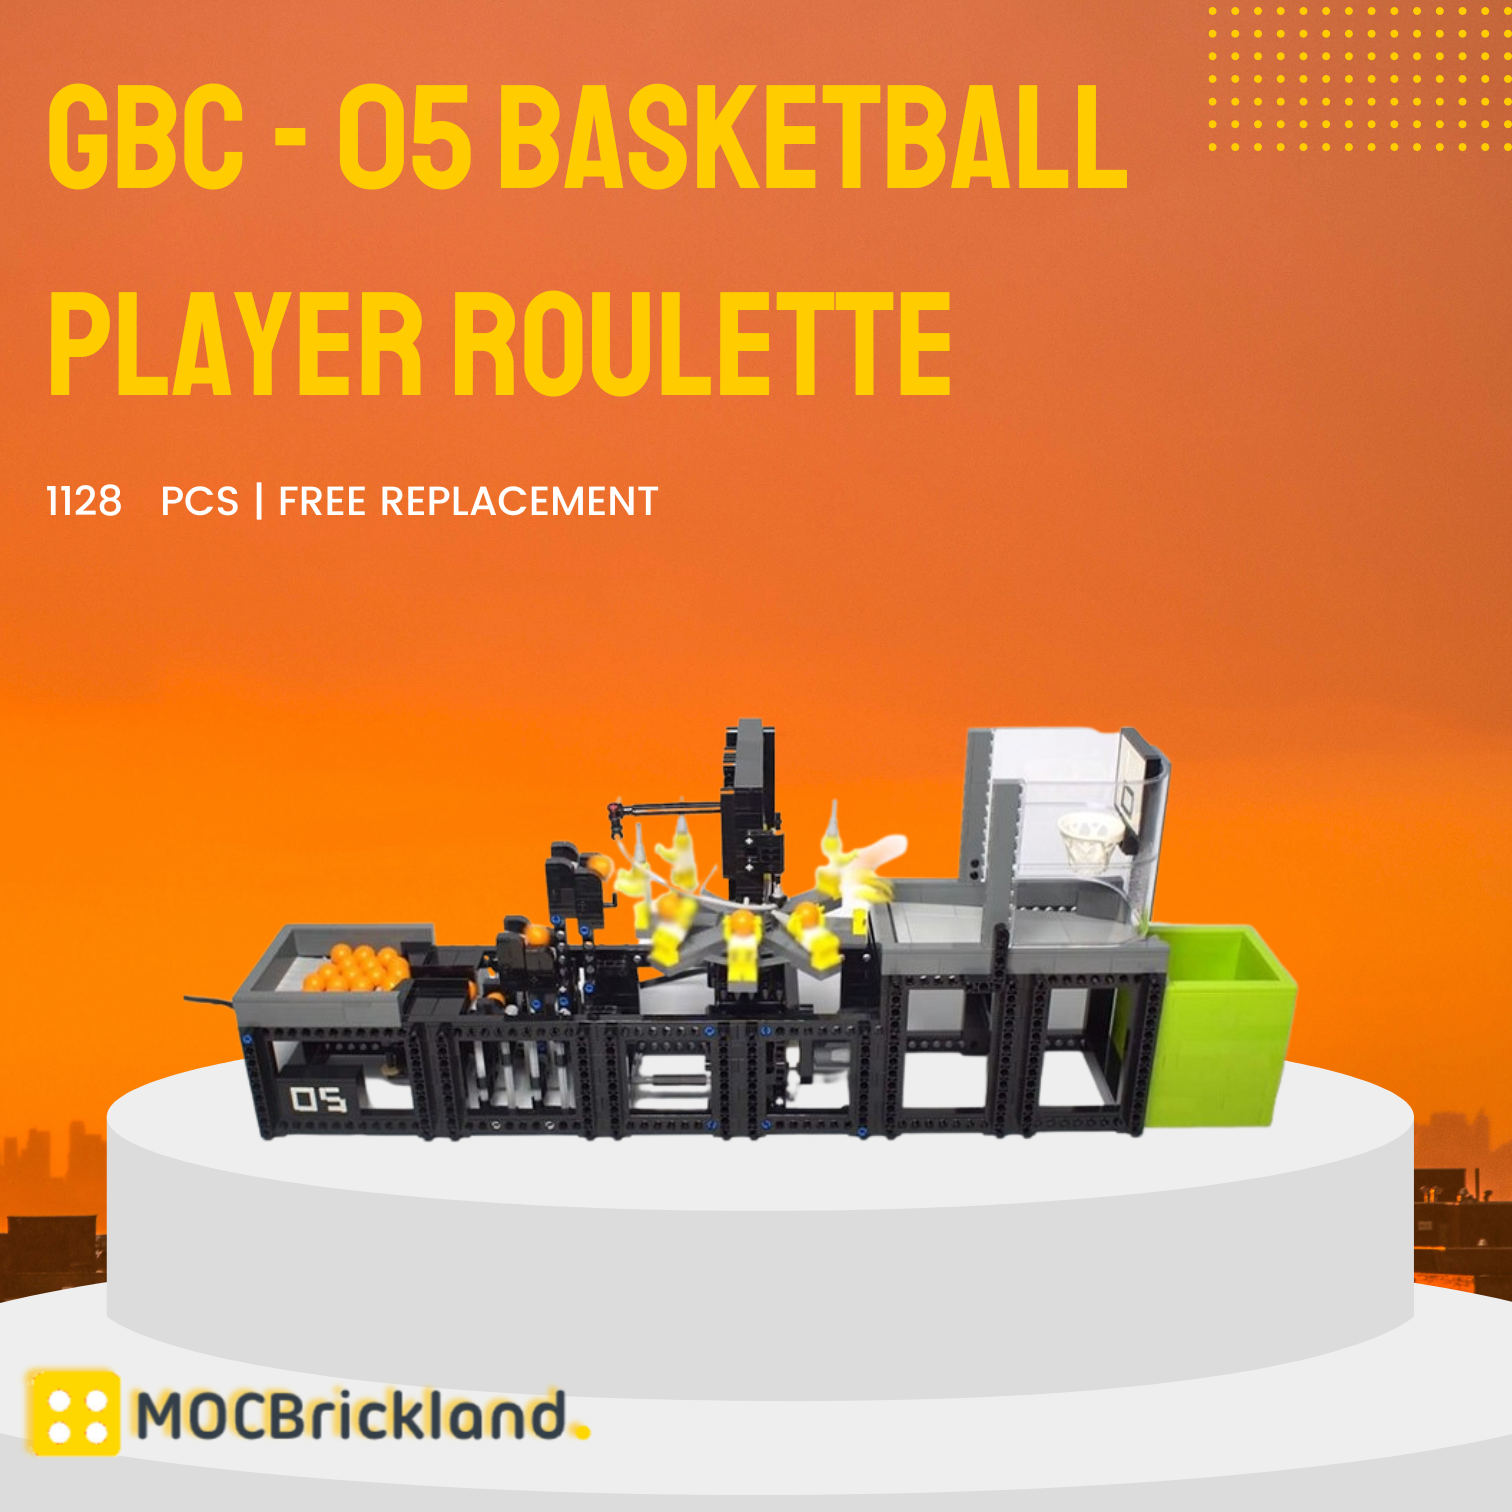 GBC - 05 Basketball Player Roulette MOC-80541 Technic With 1128 Pieces